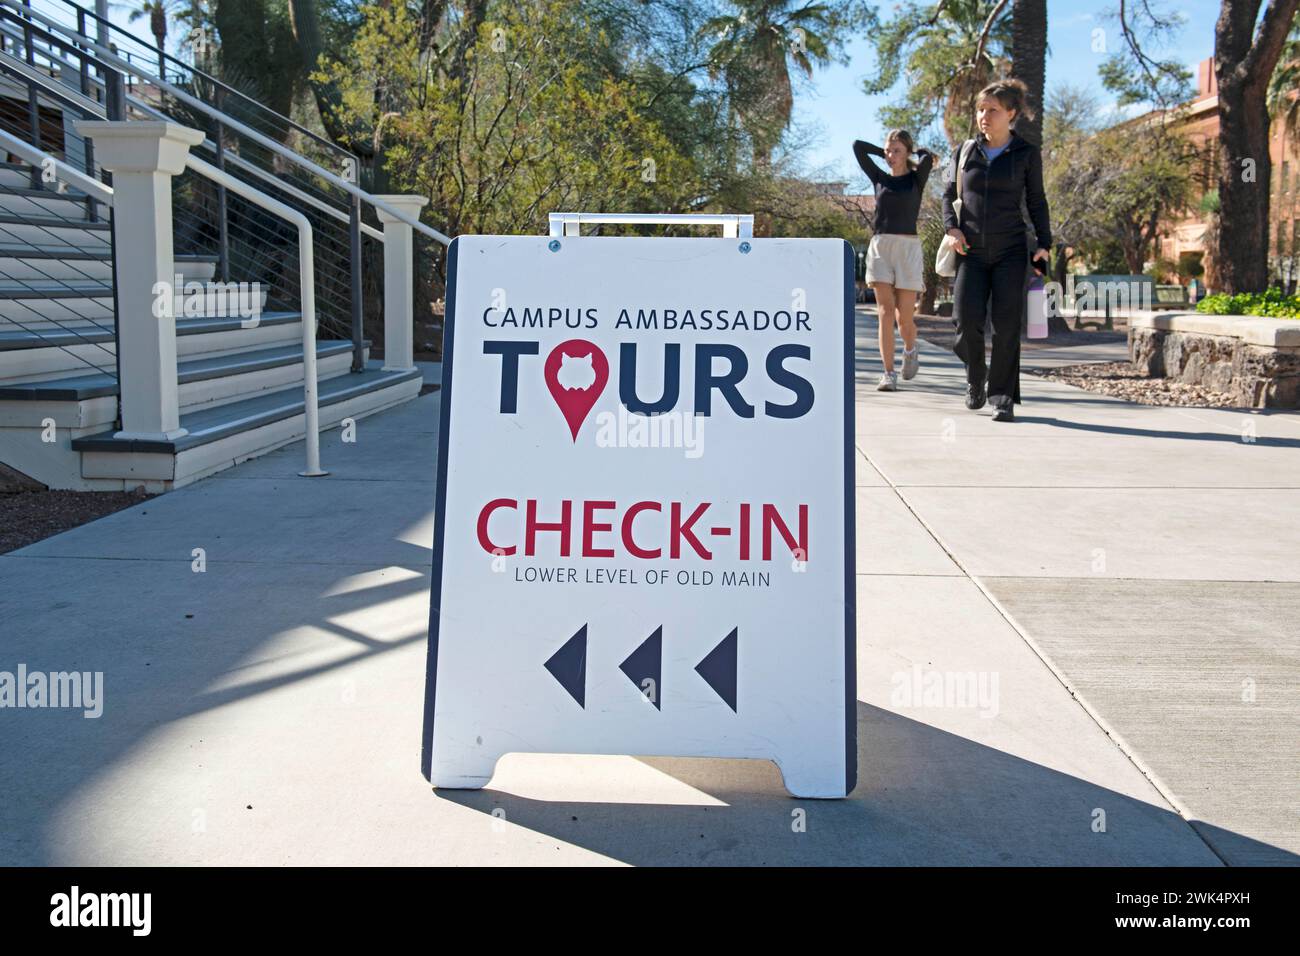 Campus Ambassador Tours Check-in sign at the University of Arizona in Tucson Stock Photo